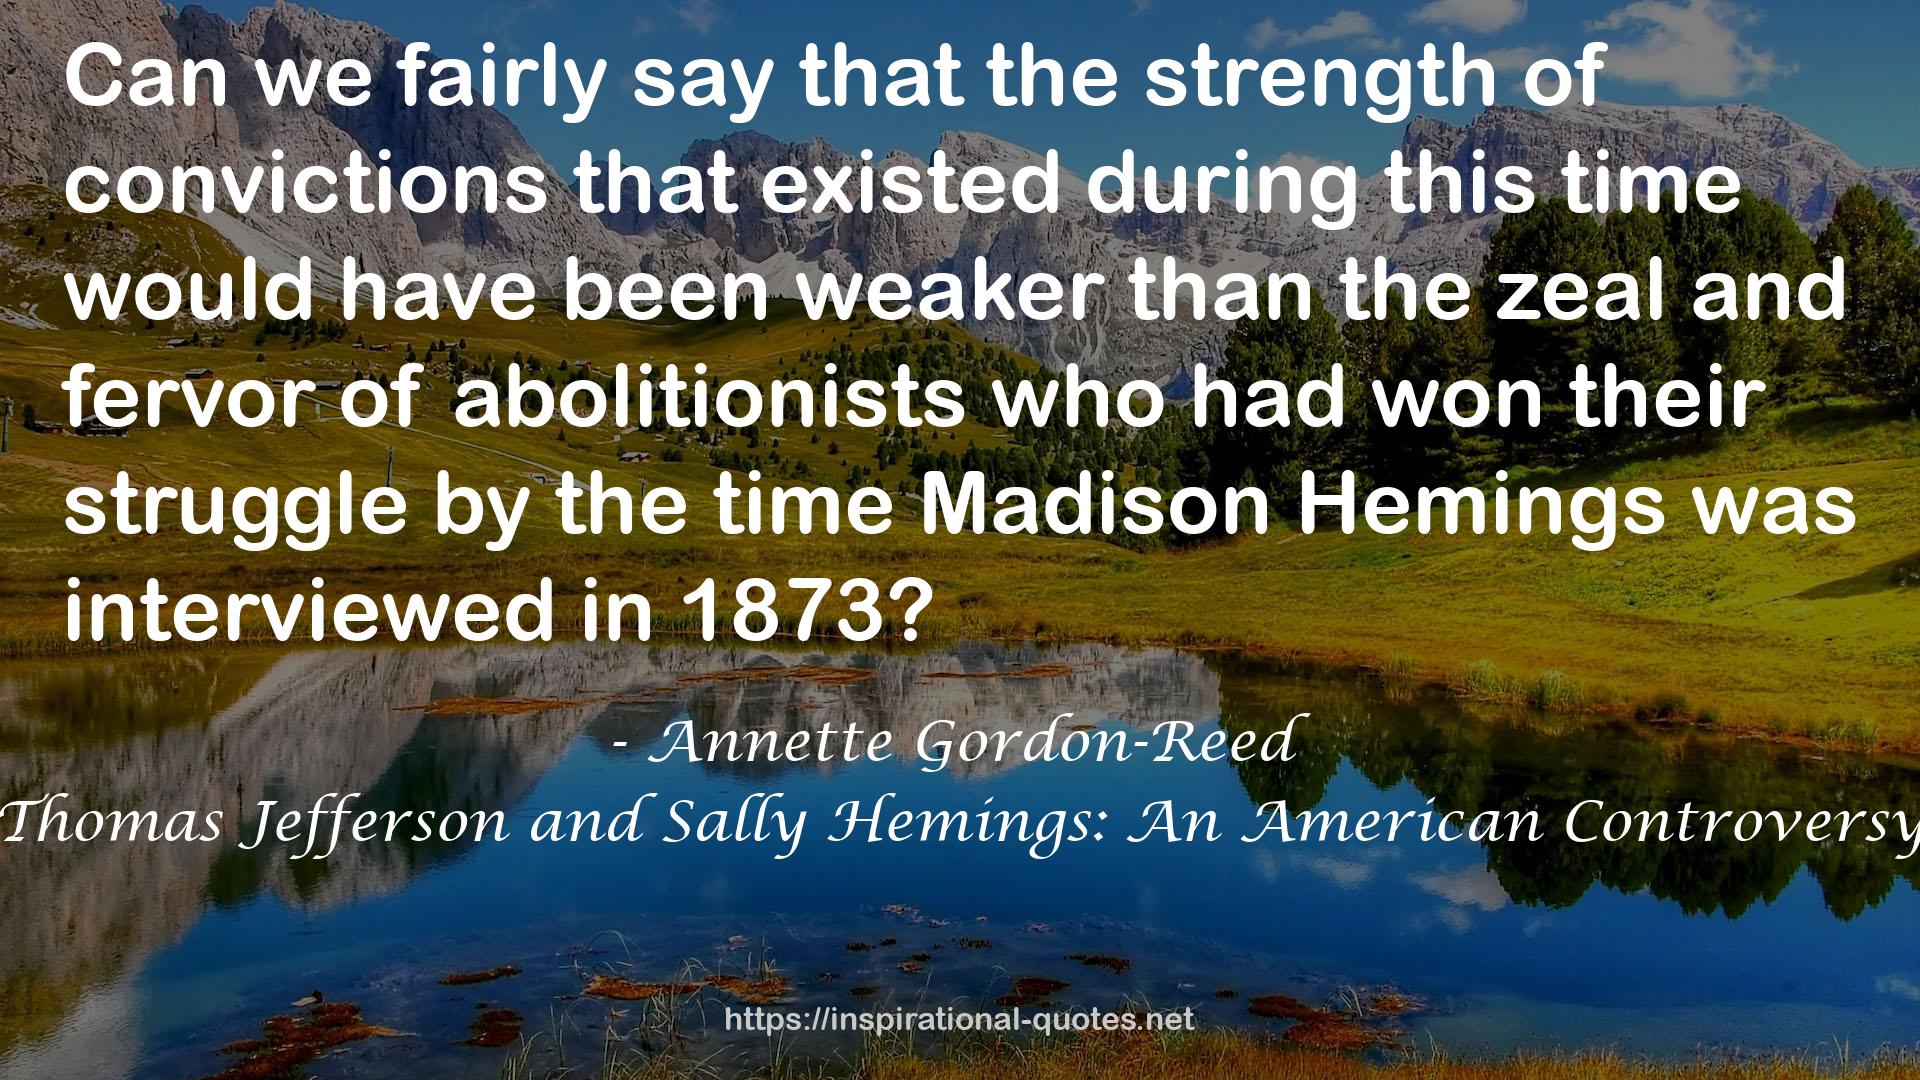 Thomas Jefferson and Sally Hemings: An American Controversy QUOTES